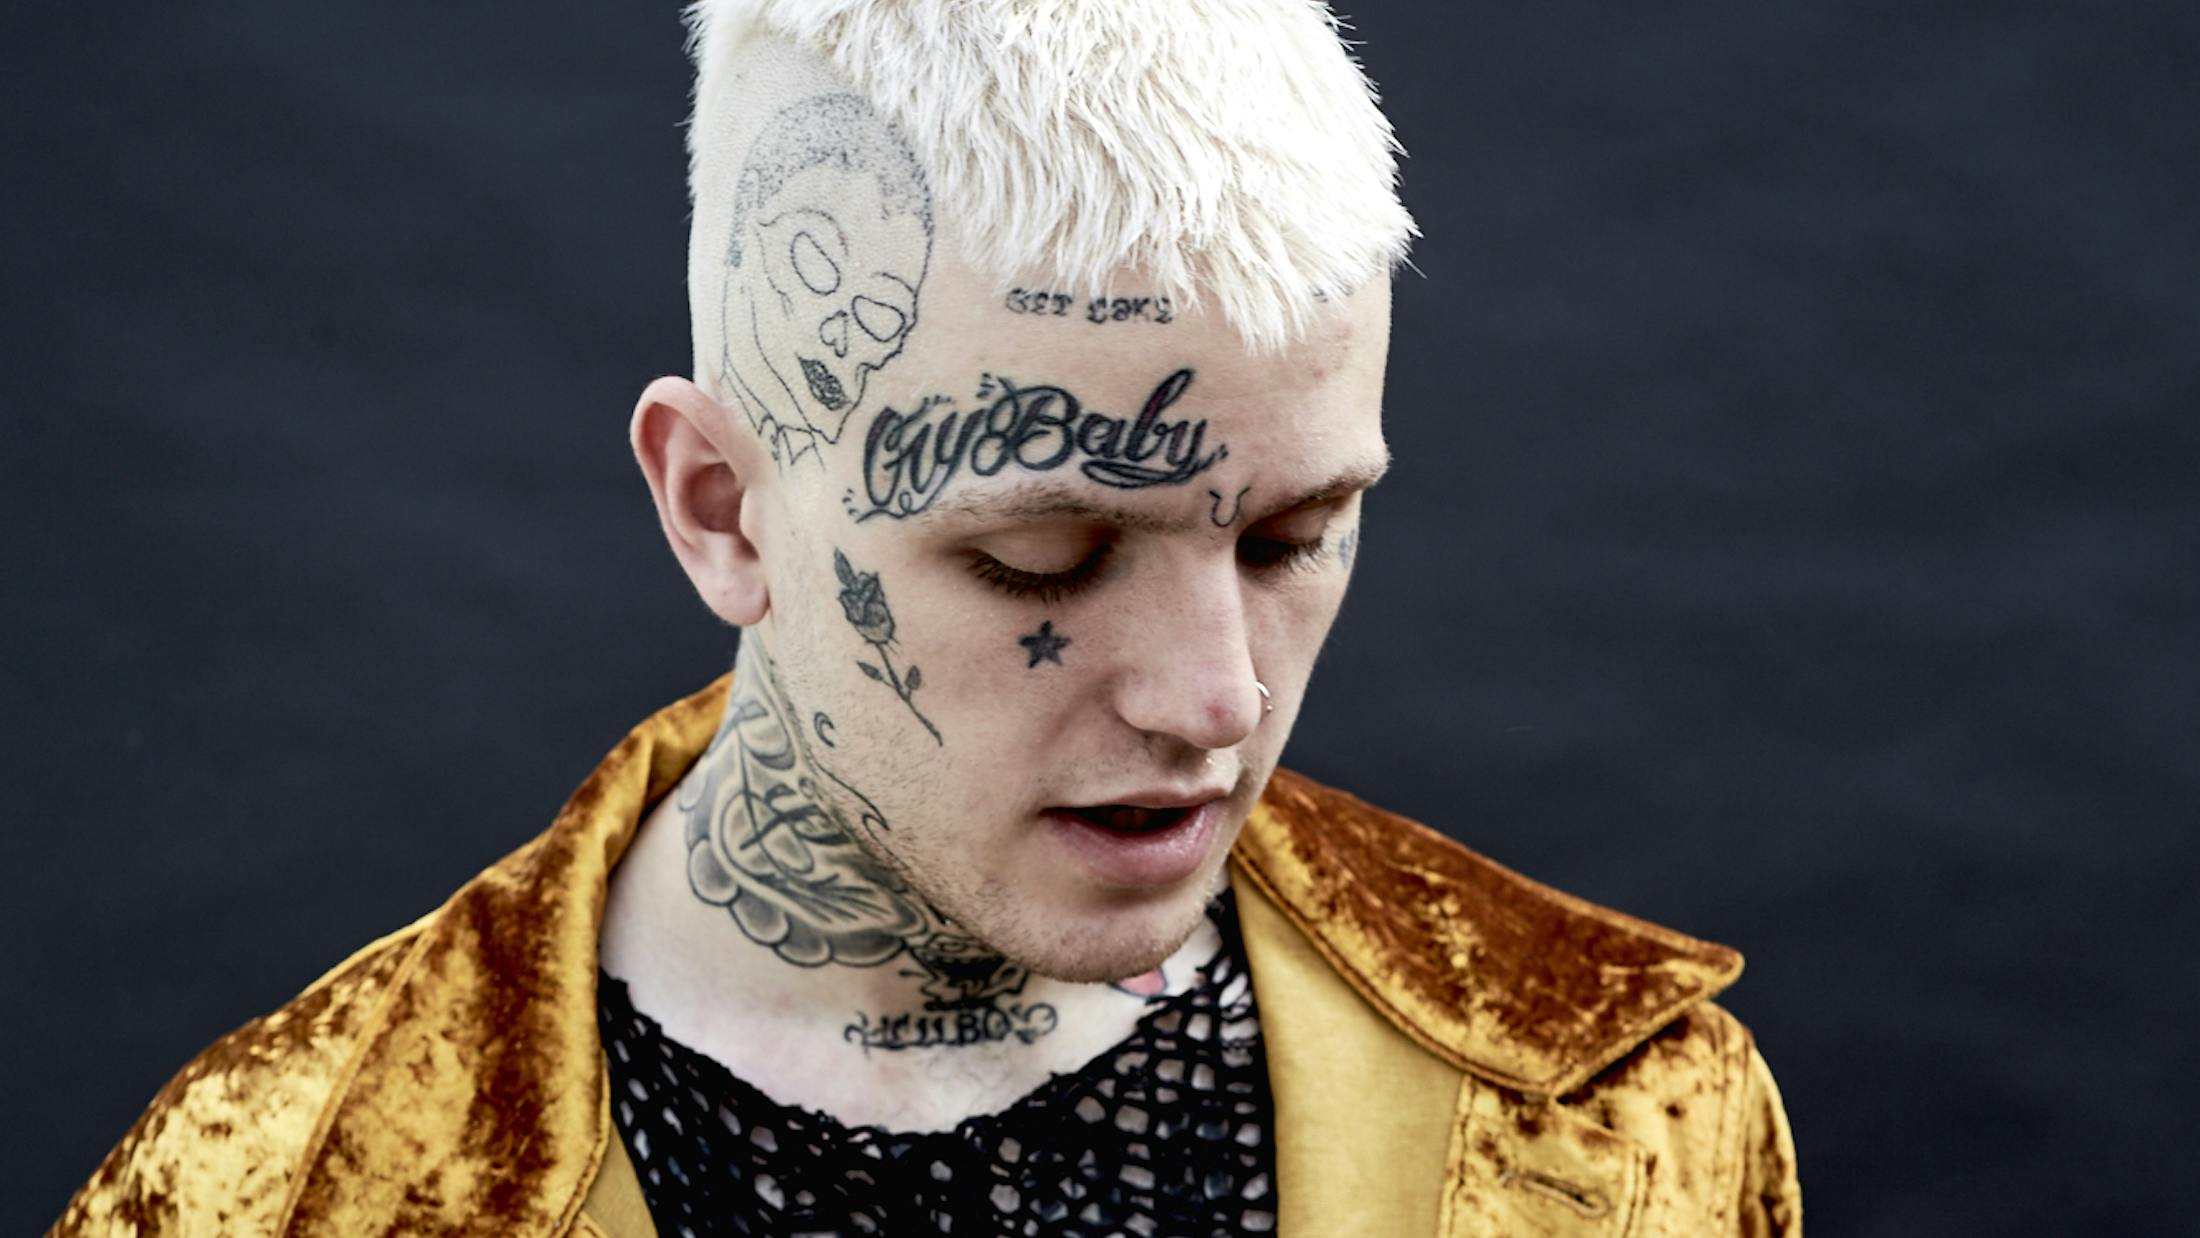 Remembering Lil Peep, One Year On